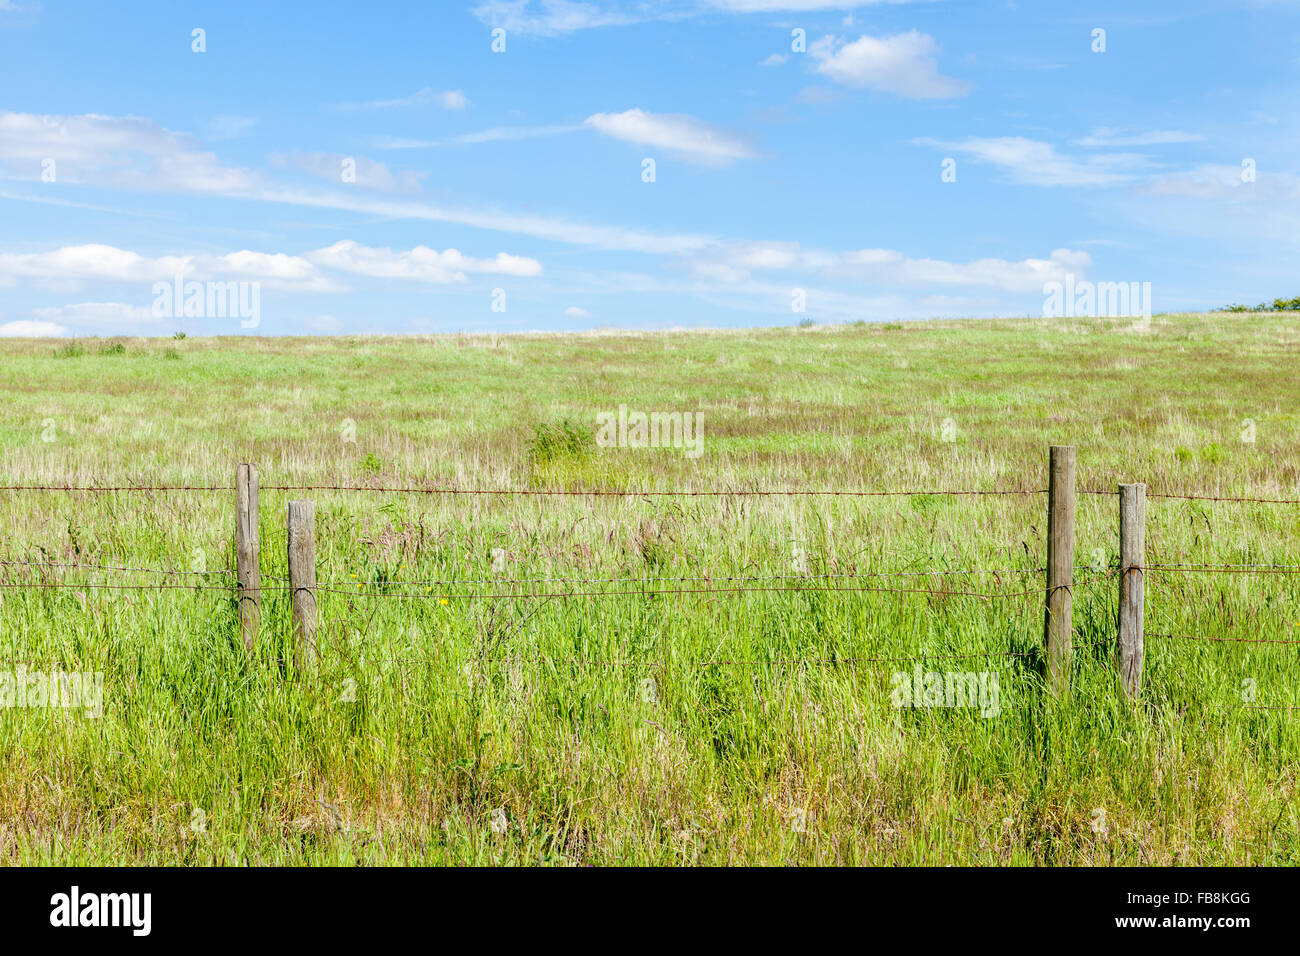 Field with long grass in Summer, fenced off with a rusty barbed wire fence on wooden posts, England, UK Stock Photo